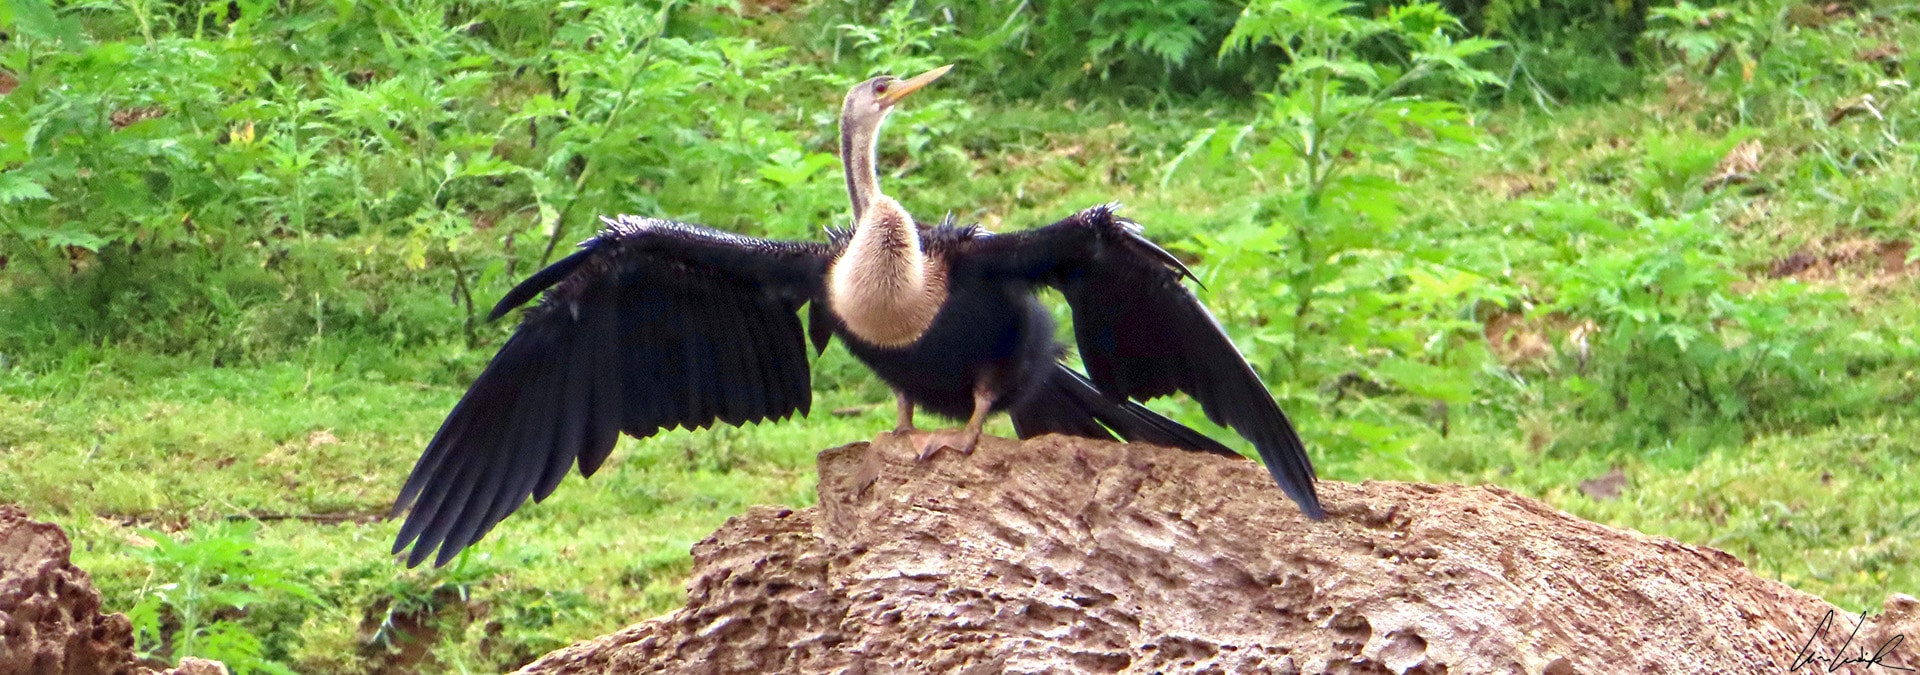 Like cormorants, the anhinga stands with wings spread and feathers fanned open in a semicircular shape to dry its feathers and absorb heat.